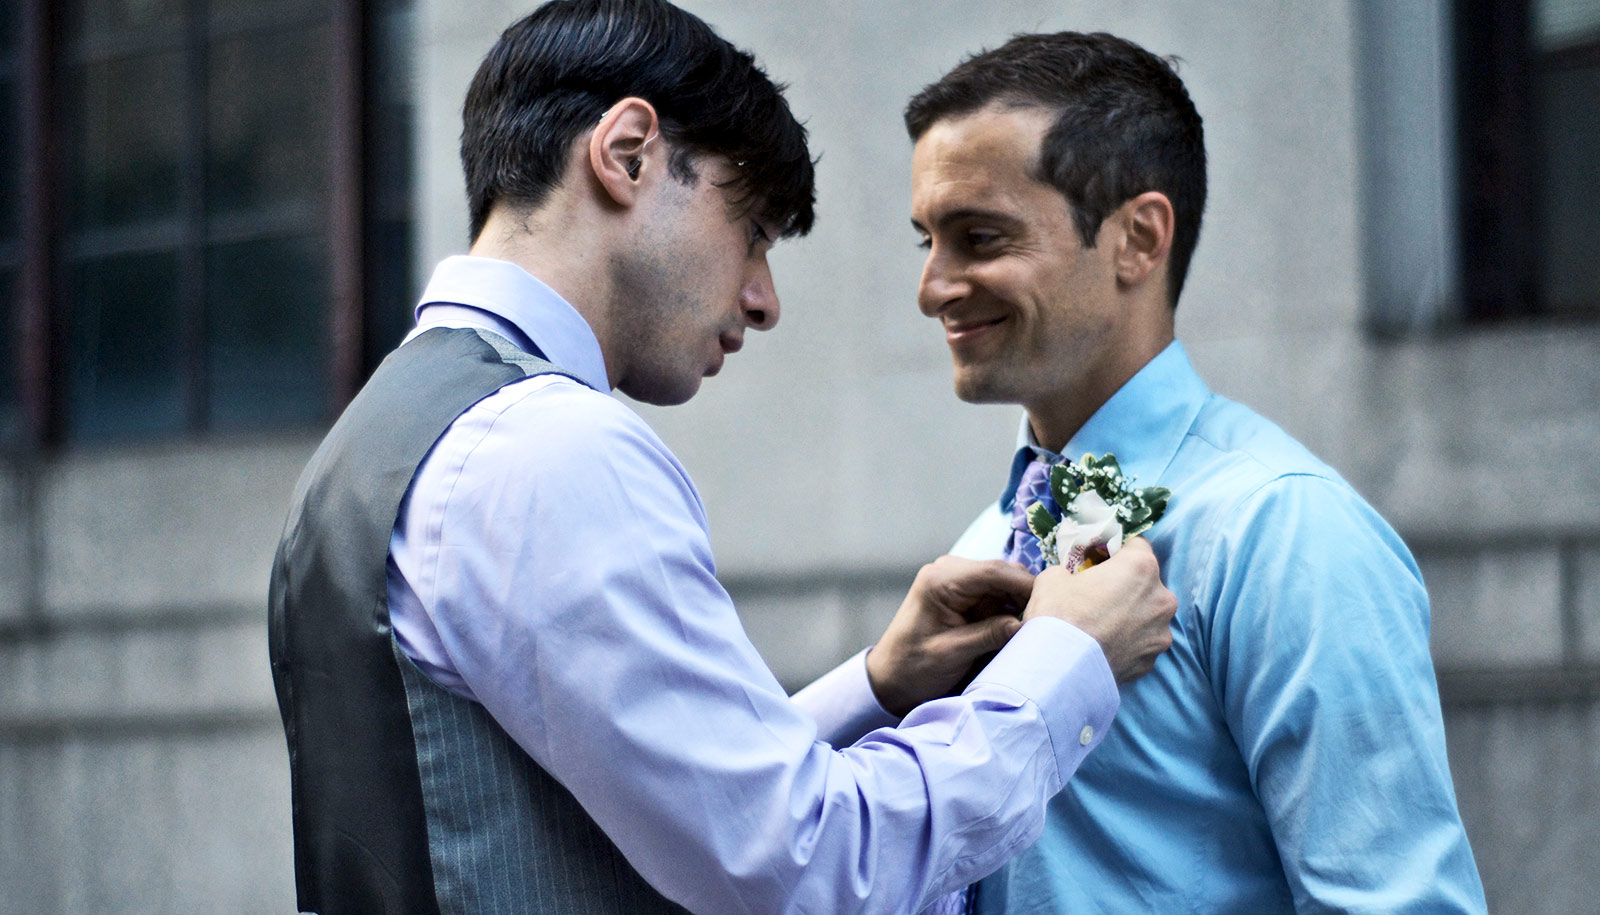 Poll: Americans split on denying services to same-sex couples.